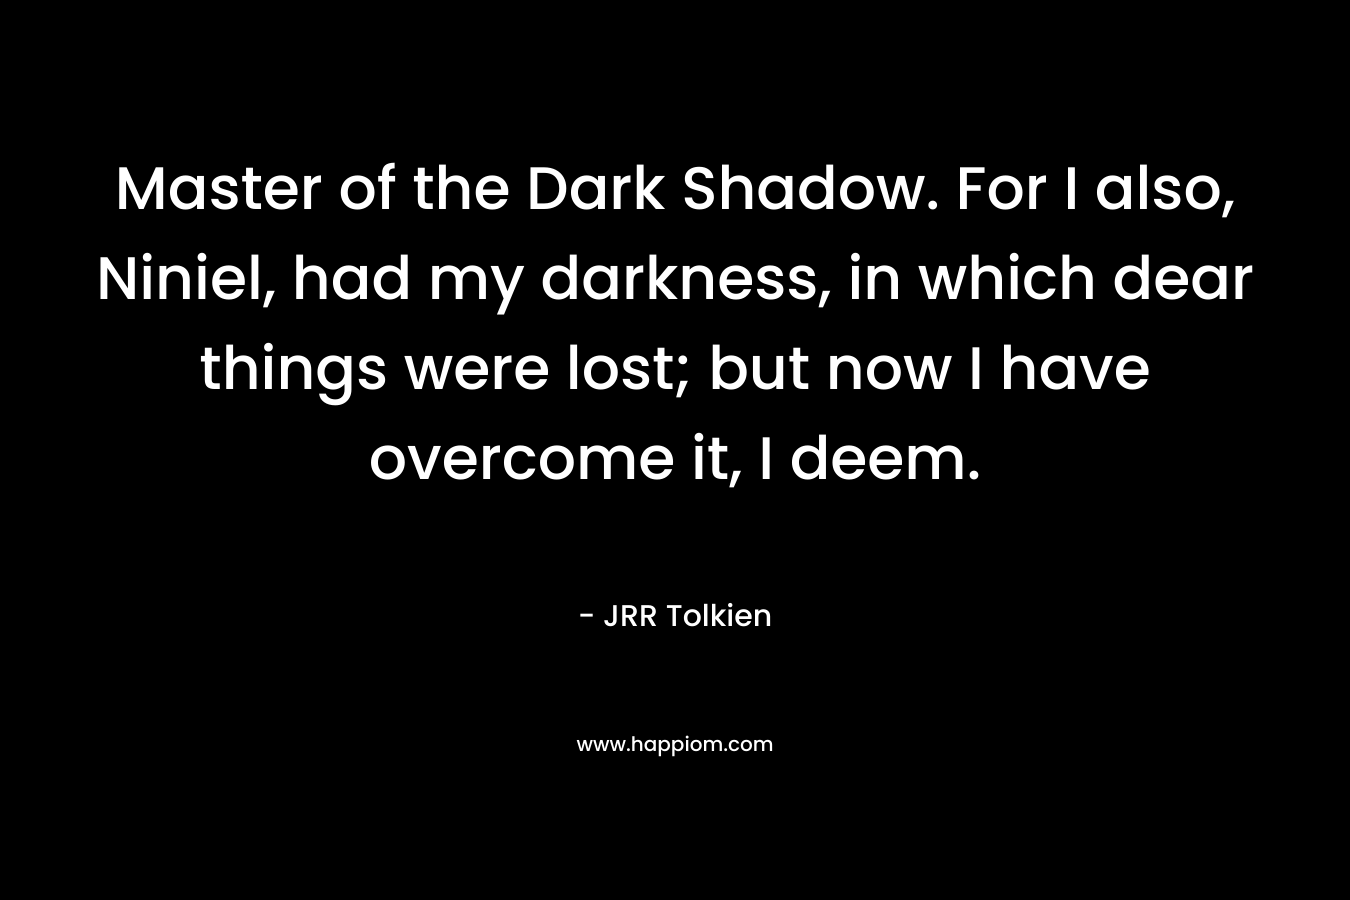 Master of the Dark Shadow. For I also, Niniel, had my darkness, in which dear things were lost; but now I have overcome it, I deem. – JRR Tolkien